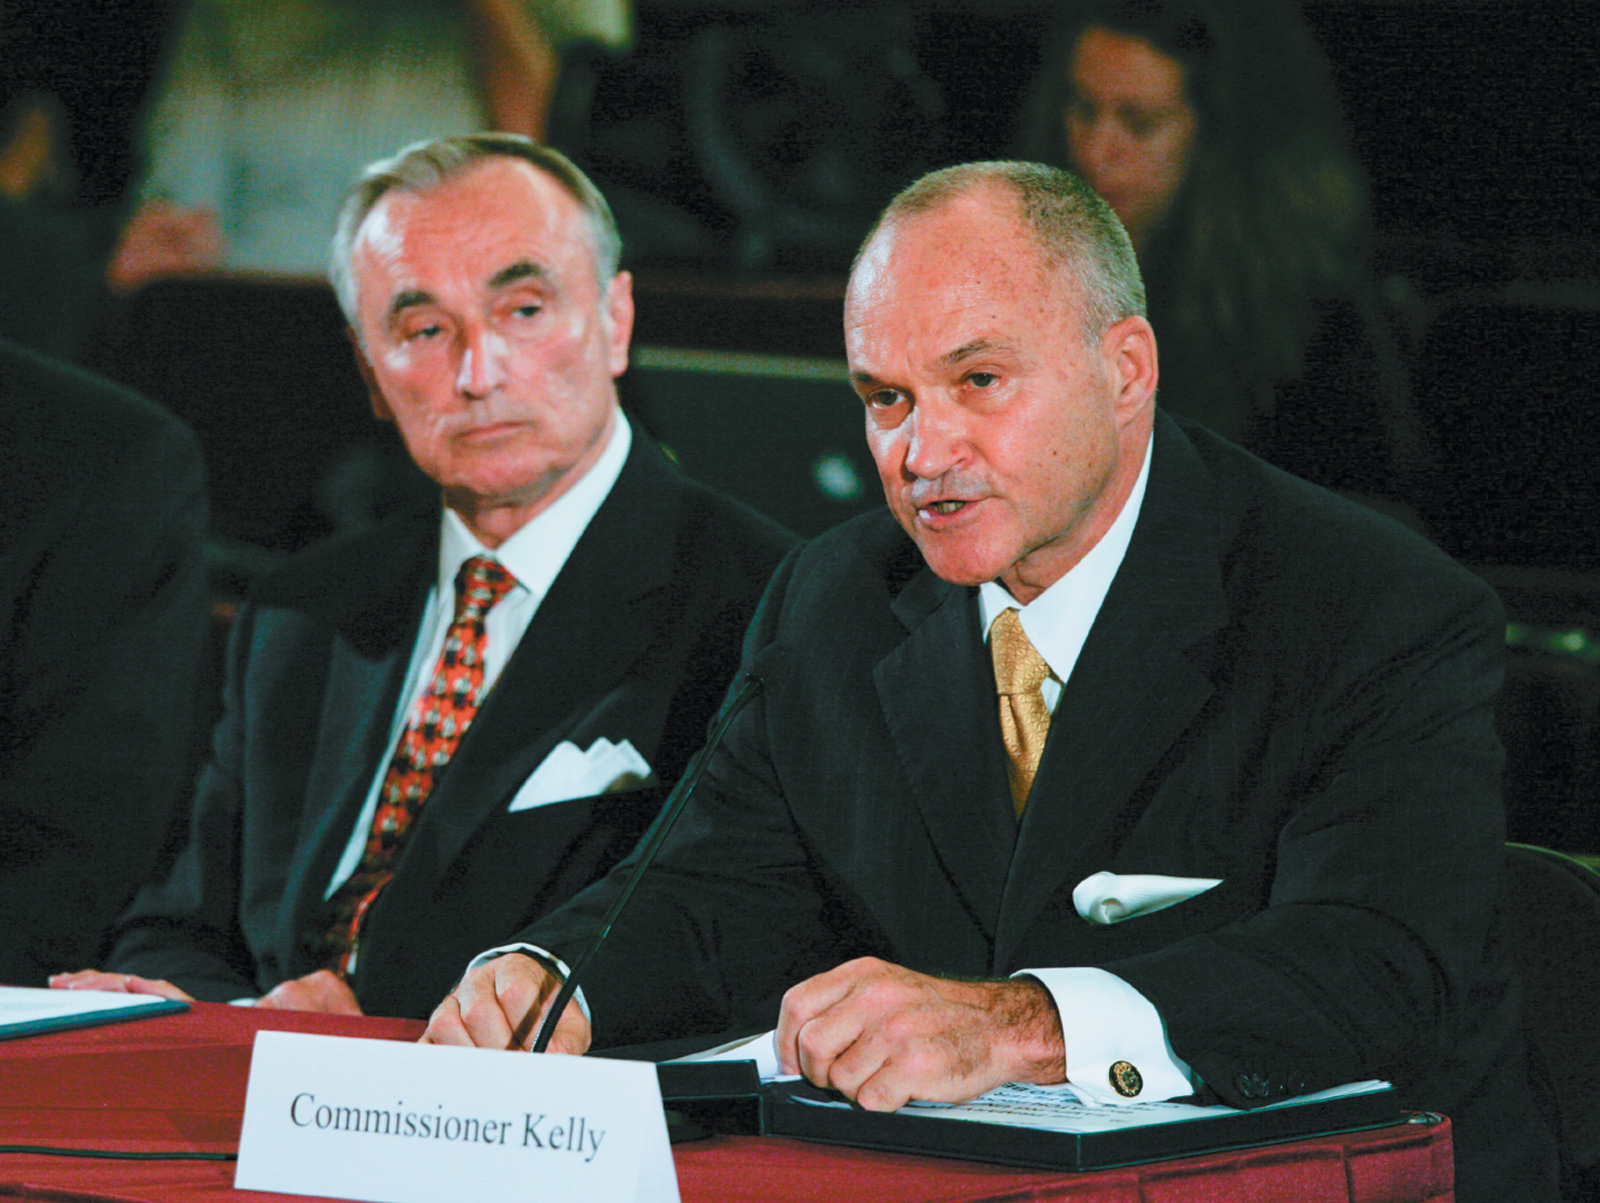 William Bratton, then chief of the LAPD, and Raymond Kelly, then commissioner of the NYPD, at a public hearing in New York City, September 2008